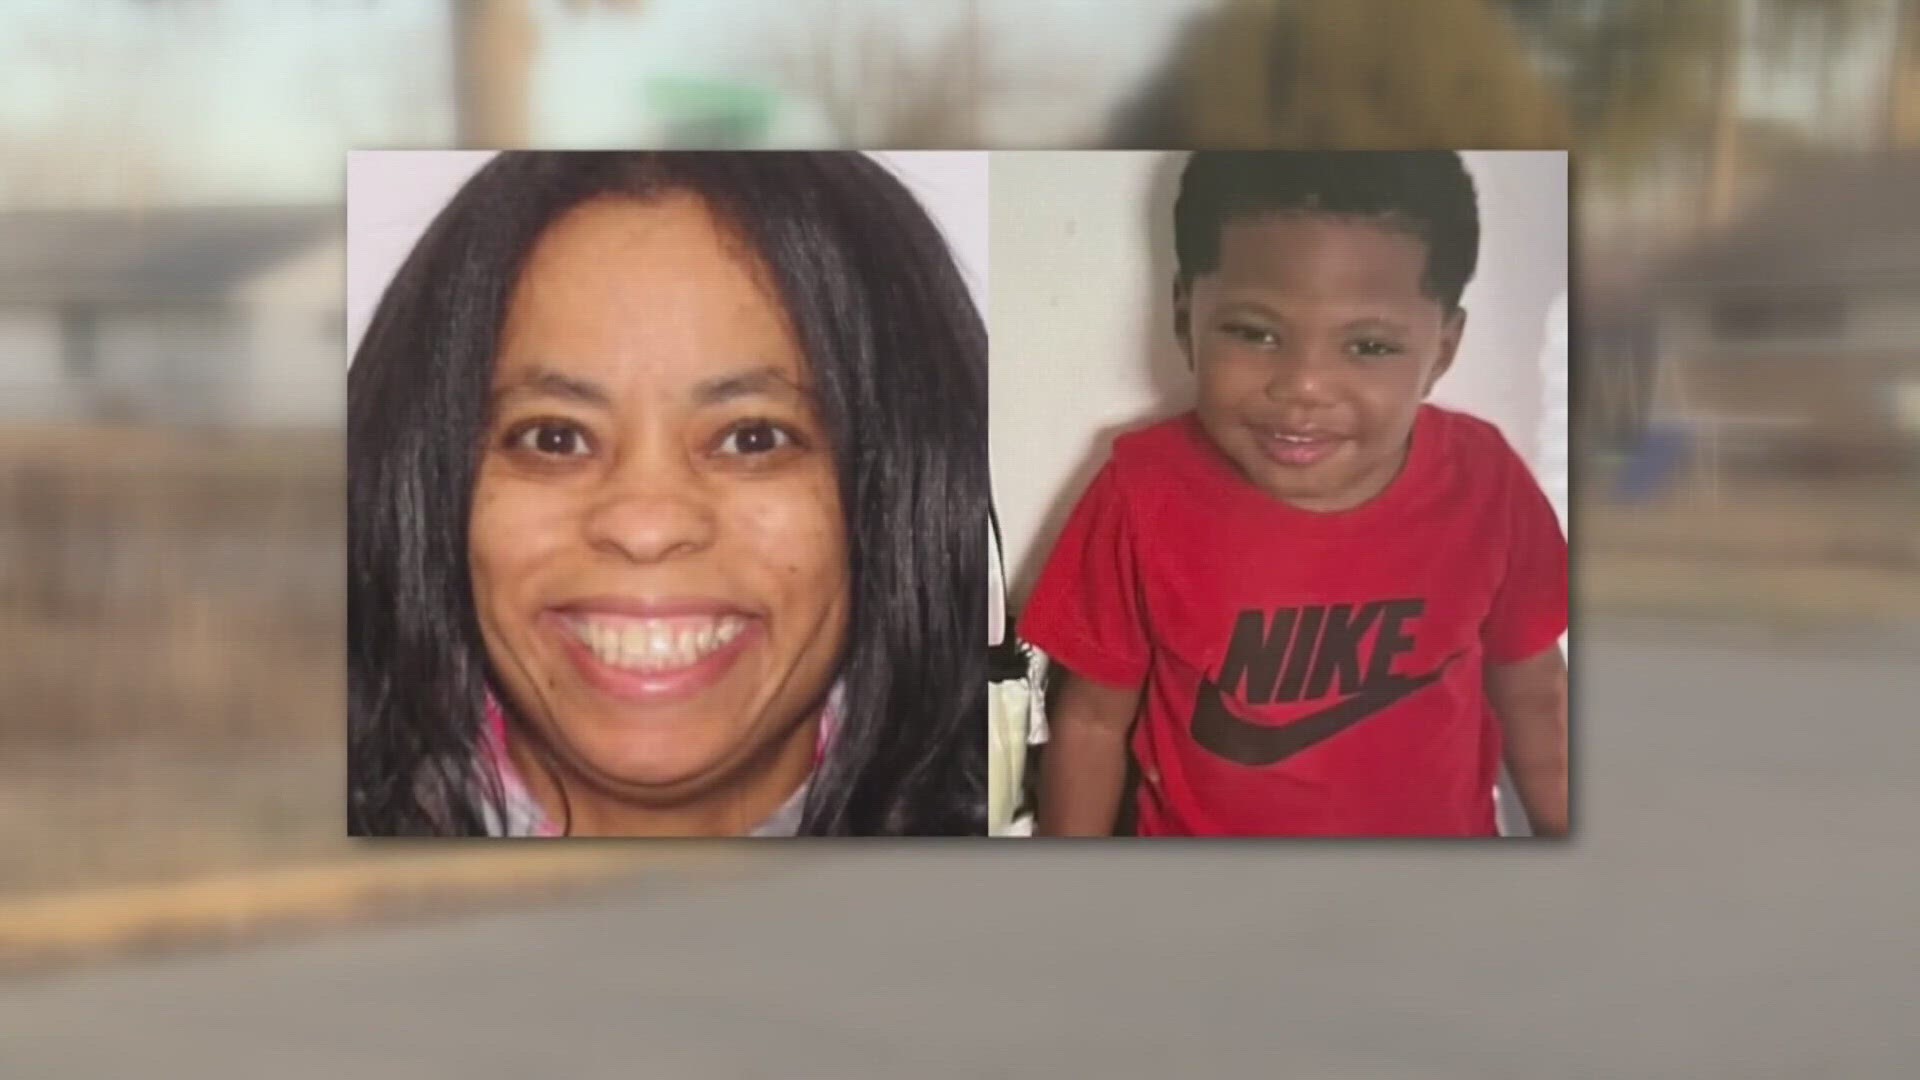 Maye is accused of killing the 5-year-old boy and putting his body in a sewage drain last month.